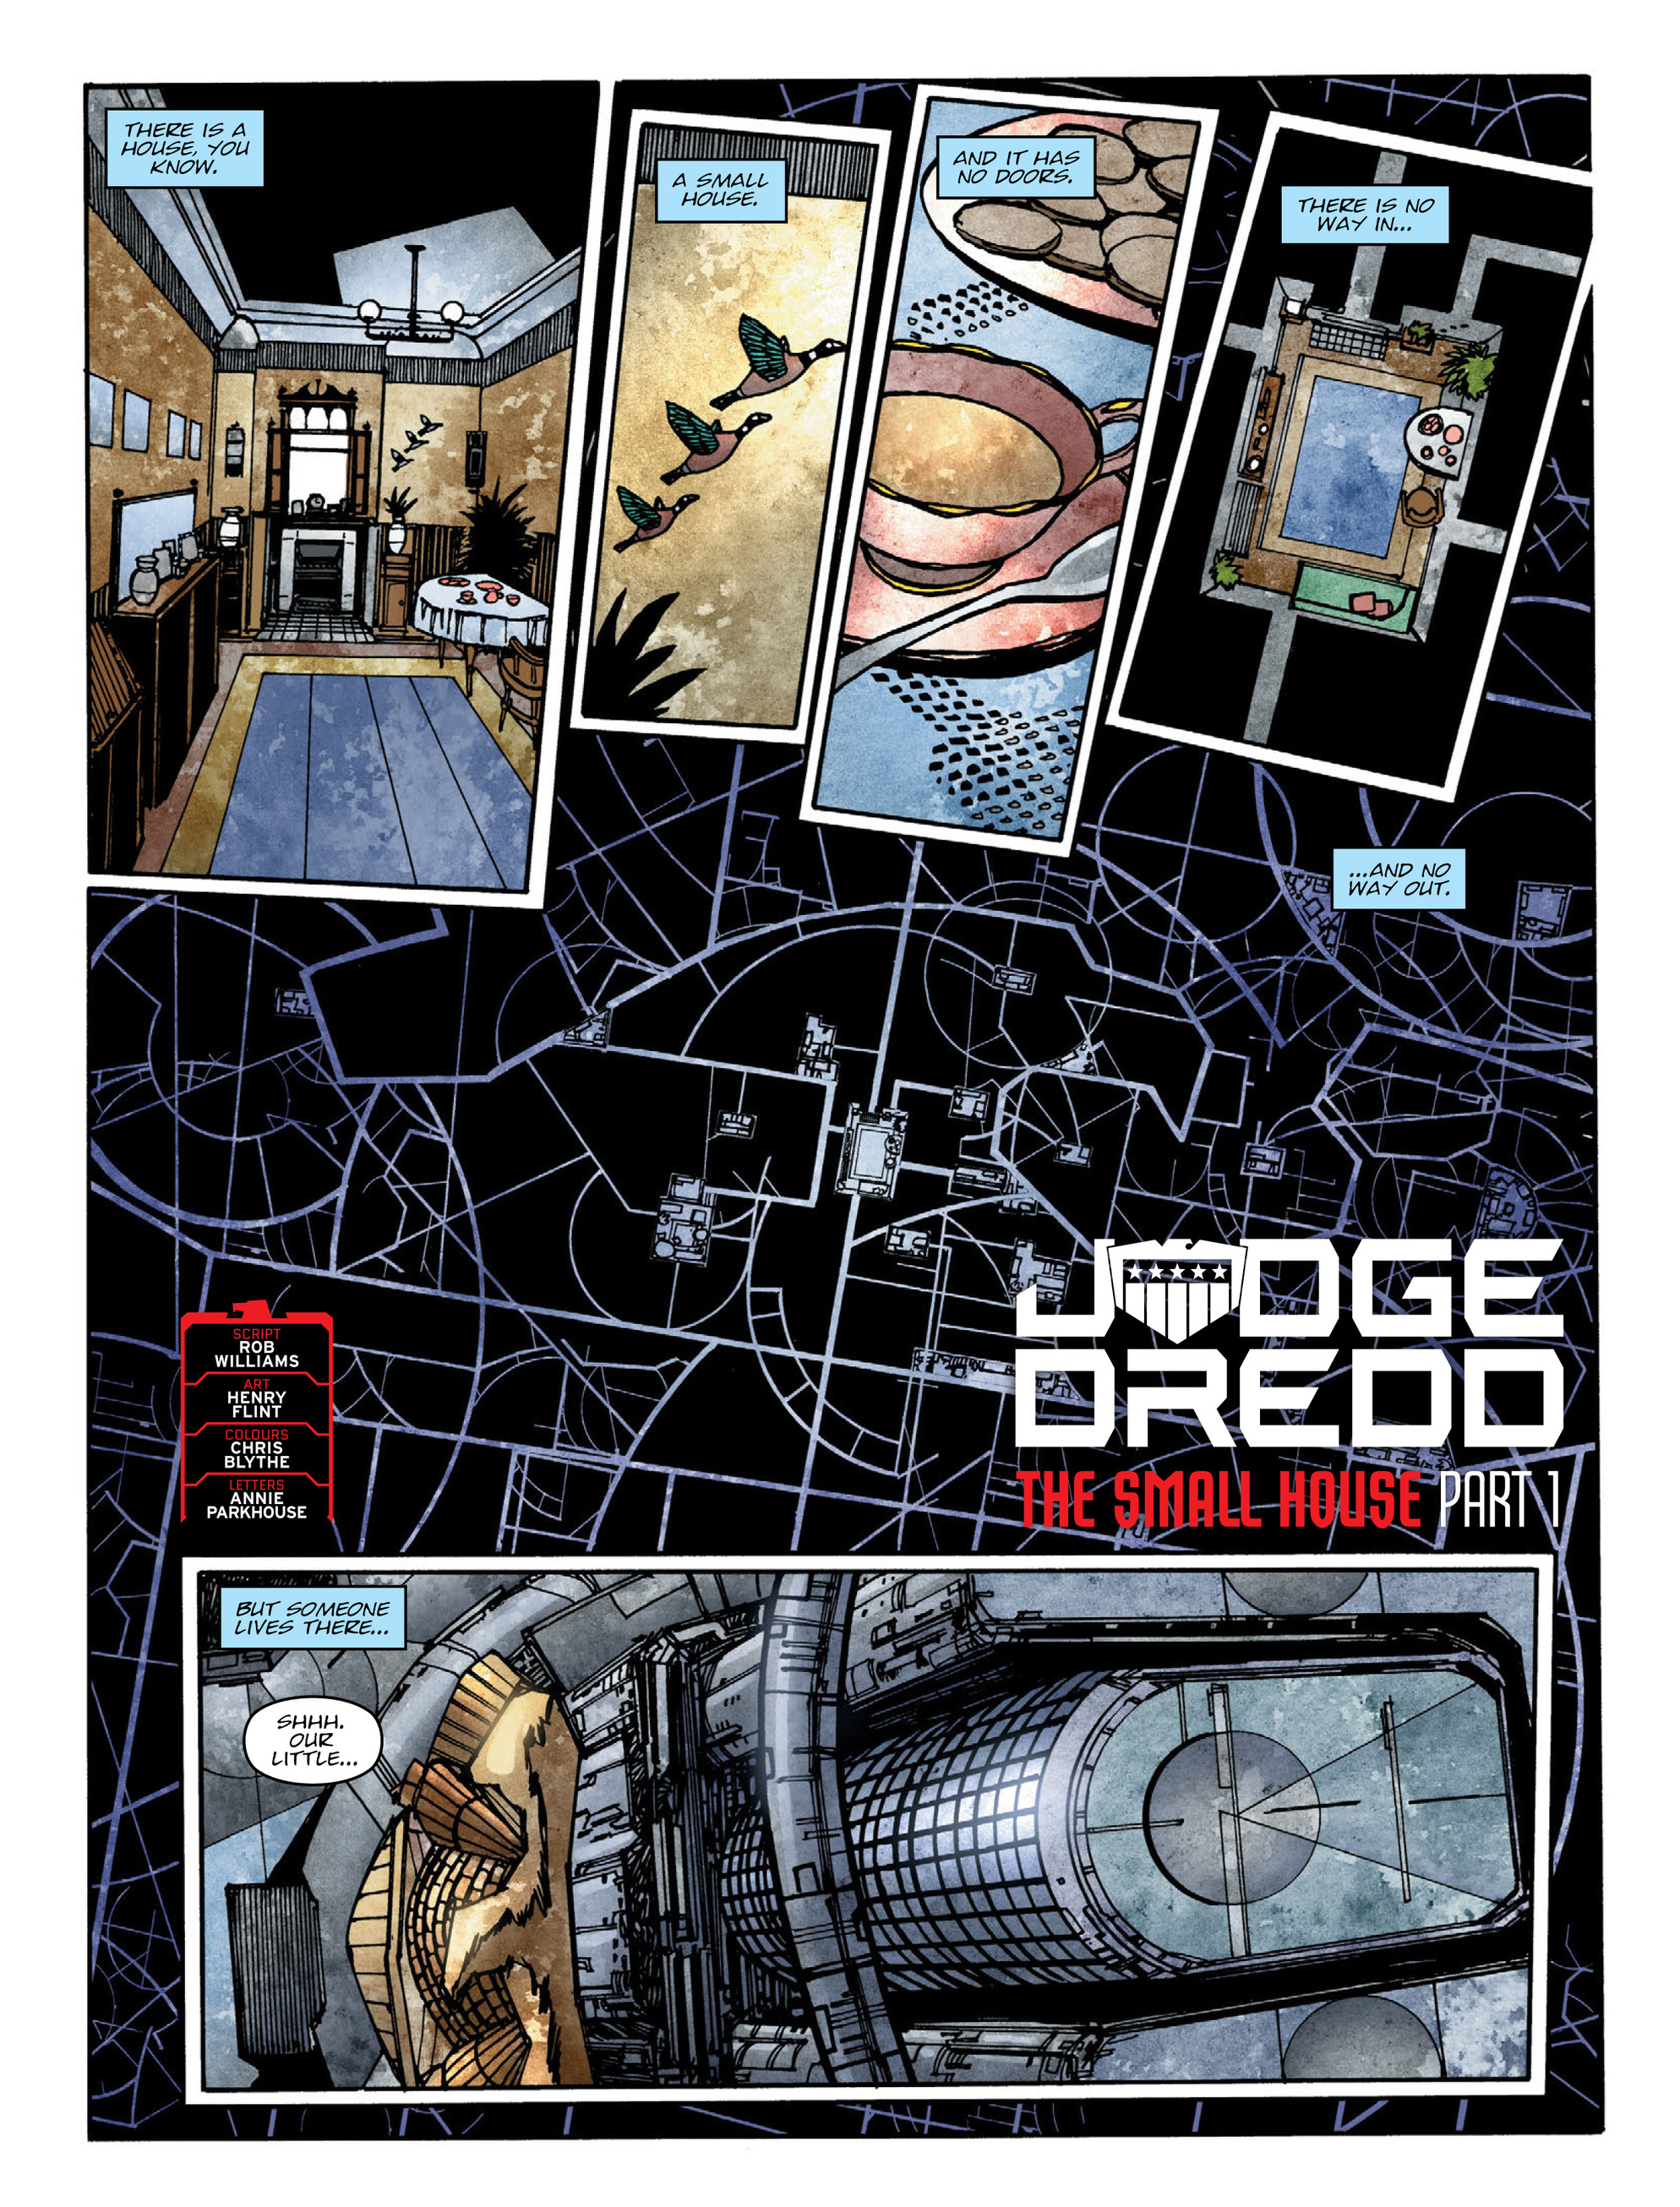 2000 AD: Chapter 2100 - Page 3